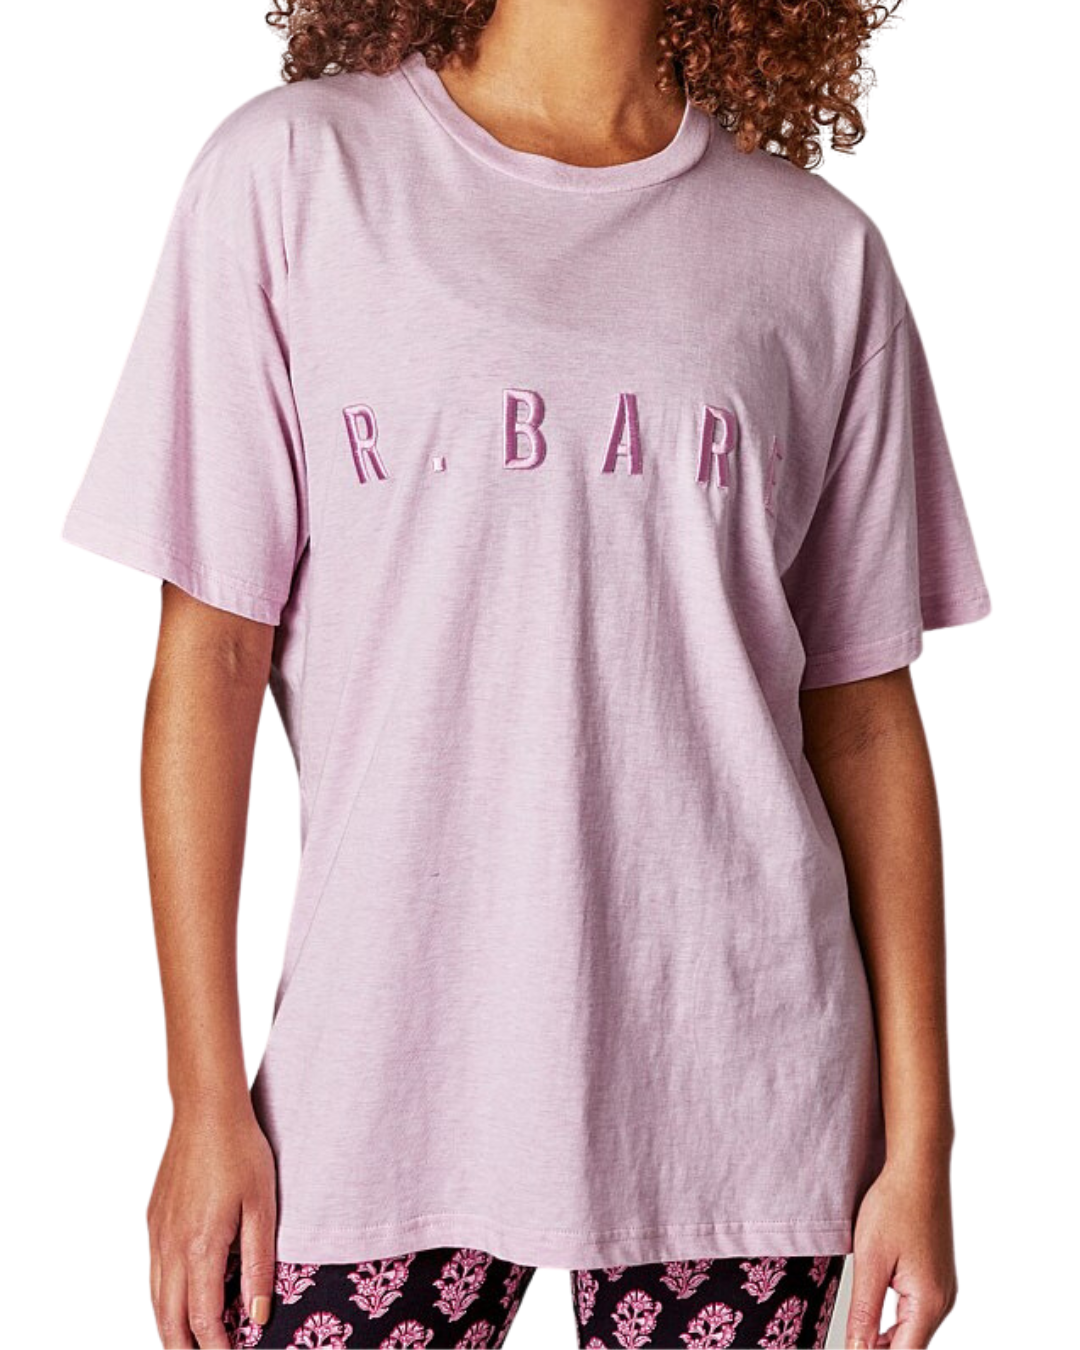 Running Bare Hollywood 90s Relax Tee